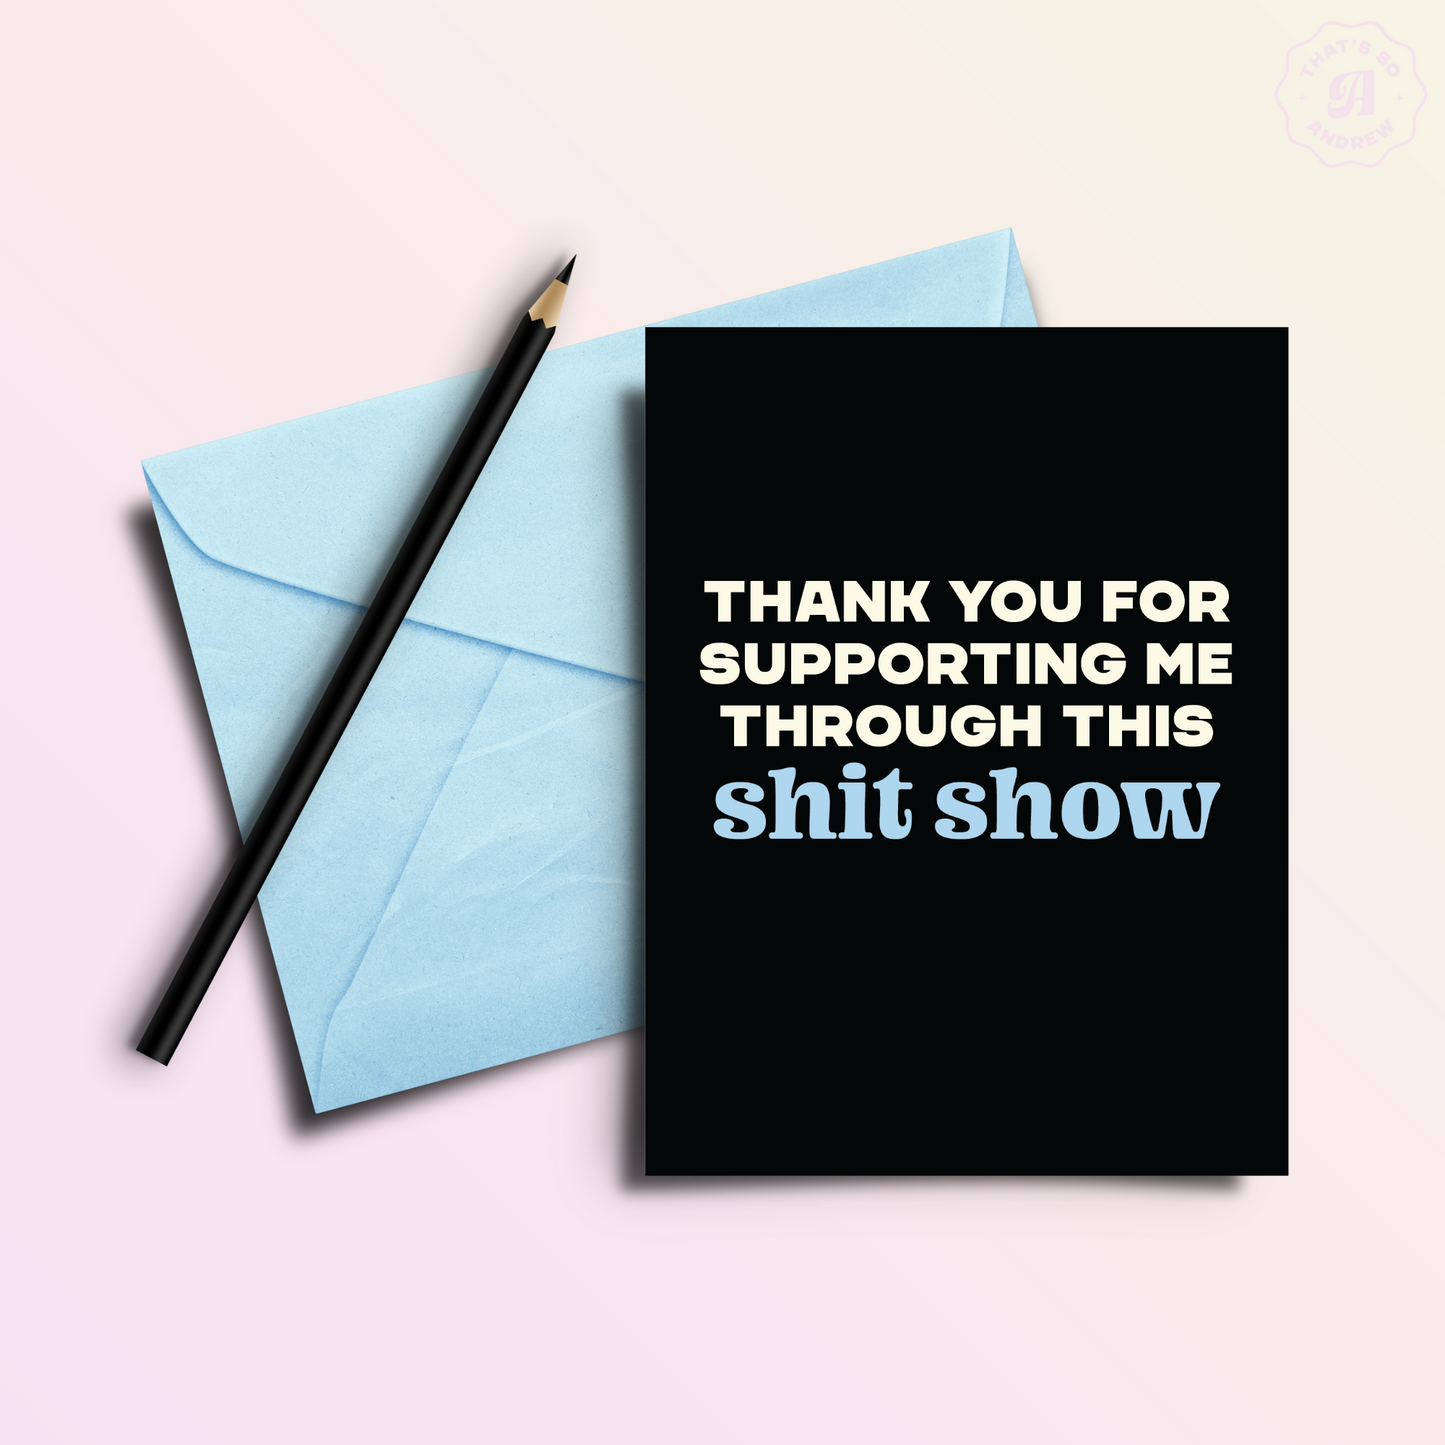 Supporting This Shit Show | Funny Thank You Greeting Card